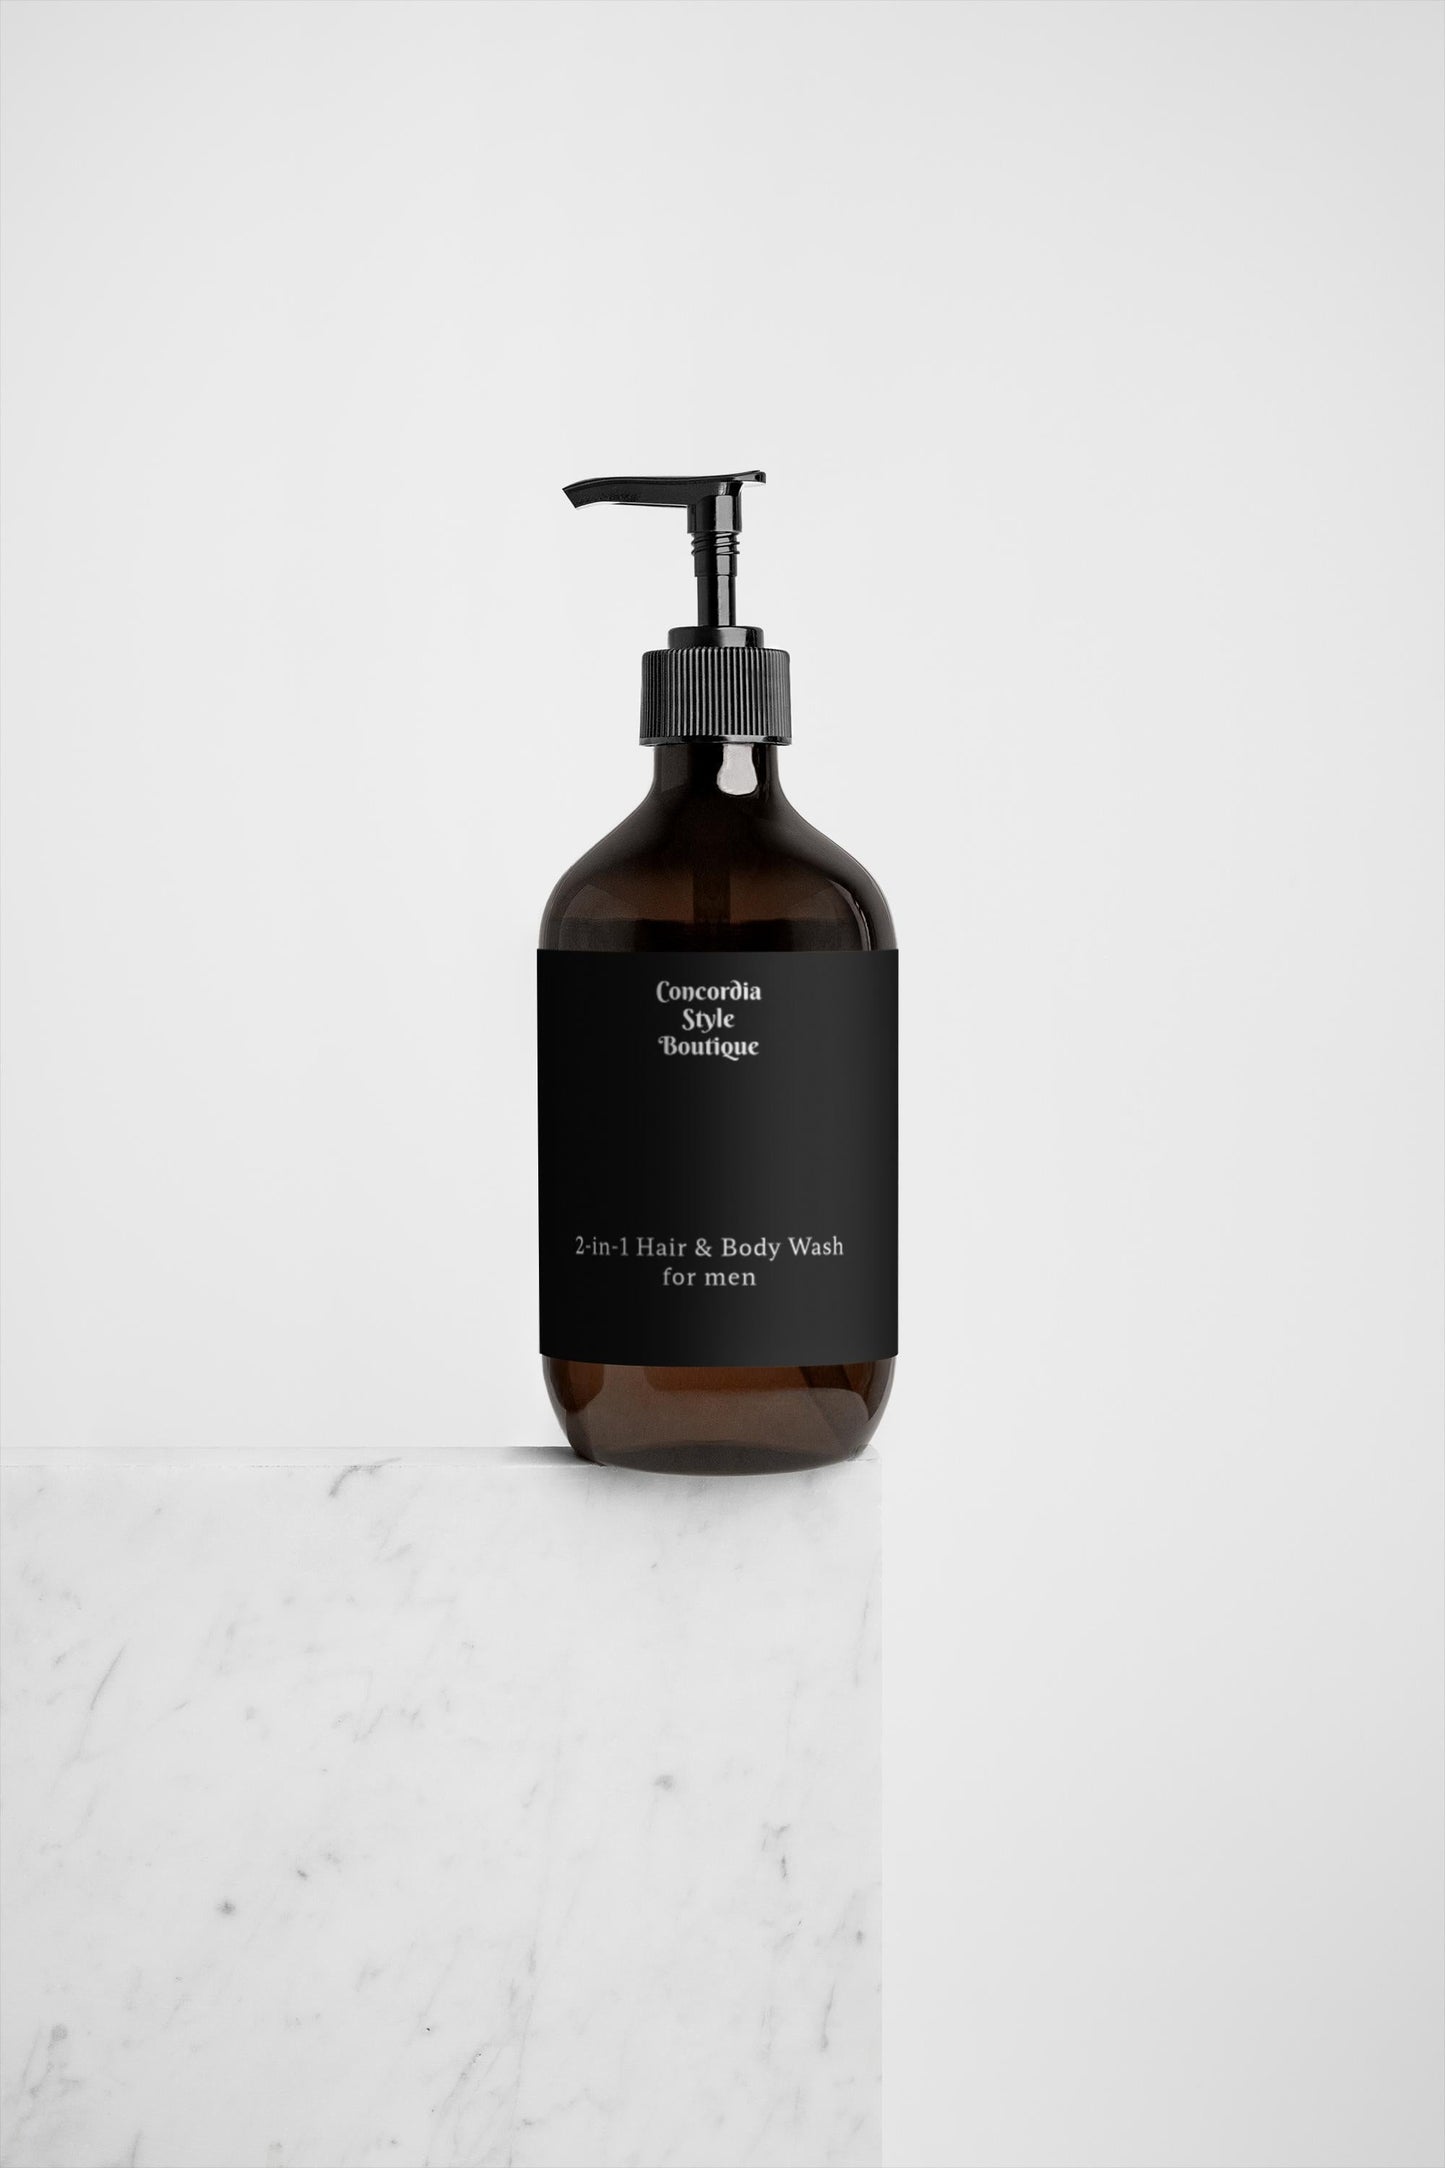 2-in-1 Hair & Body Wash for men - Premium 2-in-1 Hair & Body Wash for men from Concordia Style Boutique - Just $19.50! Shop now at Concordia Style Boutique